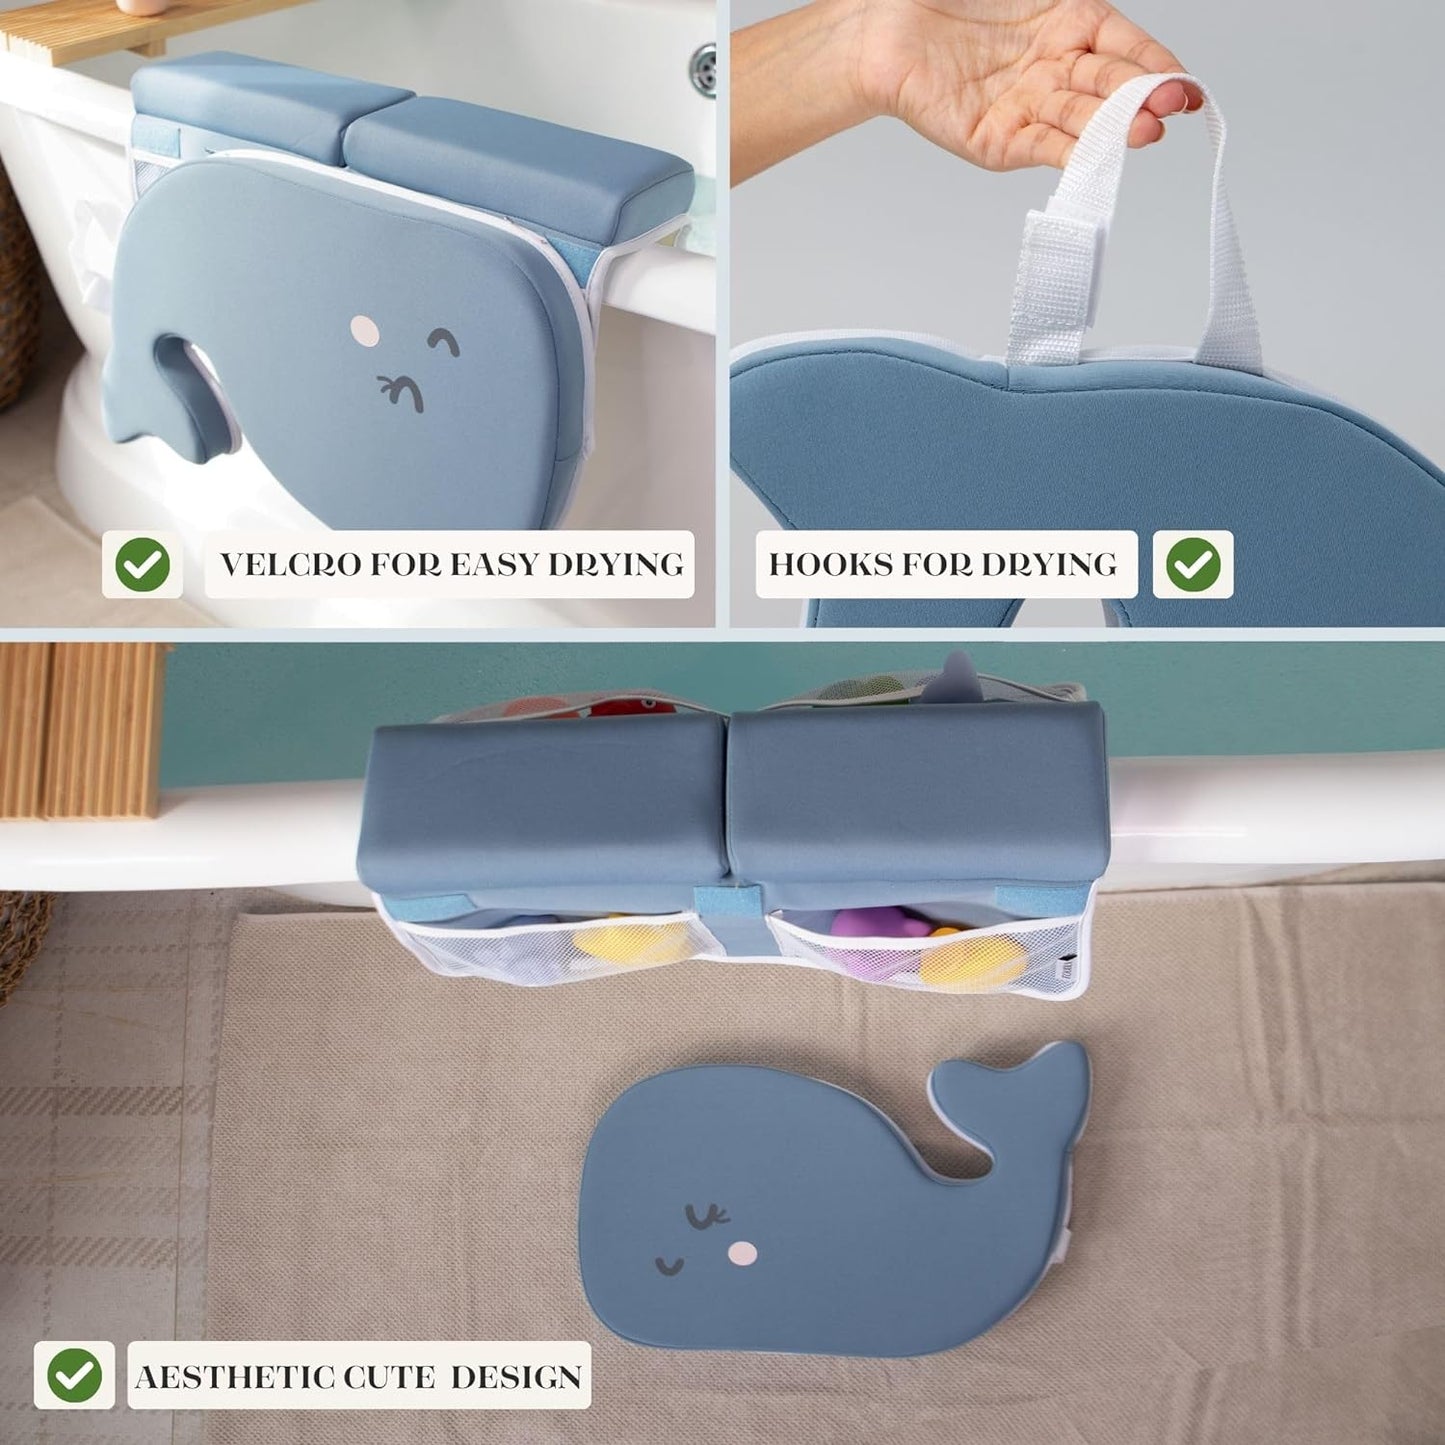 Comfortable Baby Bath Kneeler and Elbow Rest Pad Set - Thickest Bathtub Kneeler Pad with Memory Foam and Bath Toys Organizer - Bath Kneeling Pad- Relieve your Knees and Elbows (Grey)